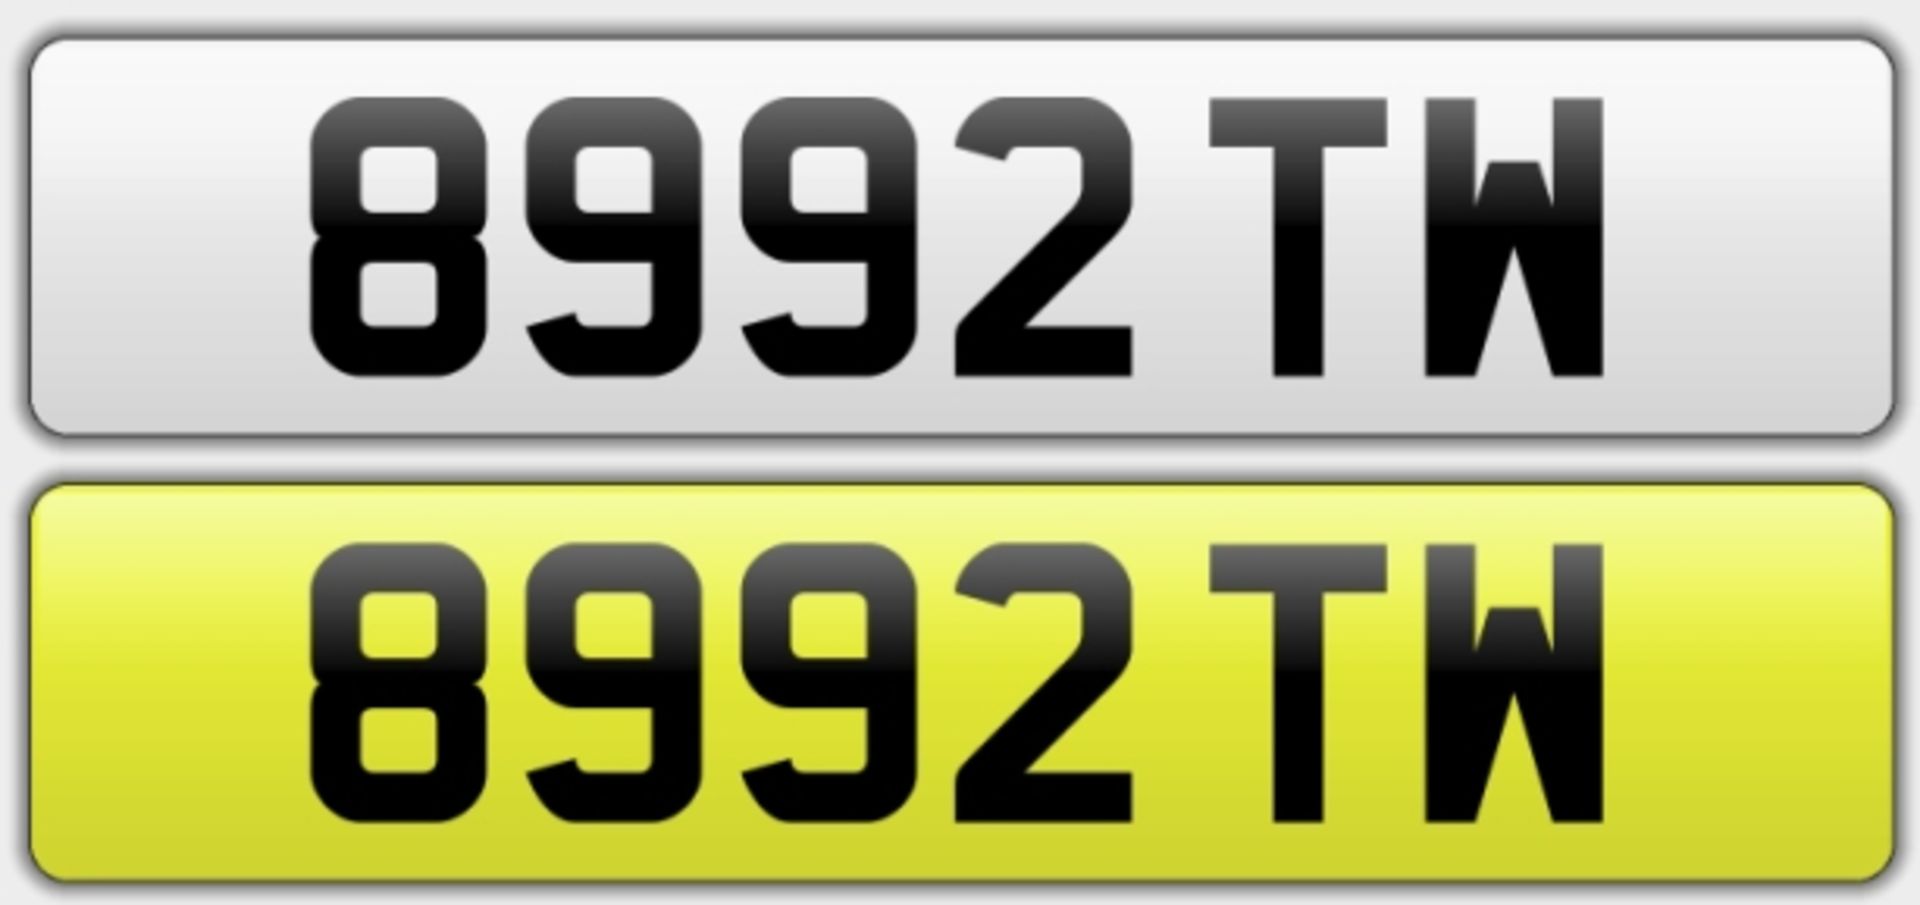 PRIVATE NUMBER PLATE REG 8992 TW WITH RETENTION DOCUMENT